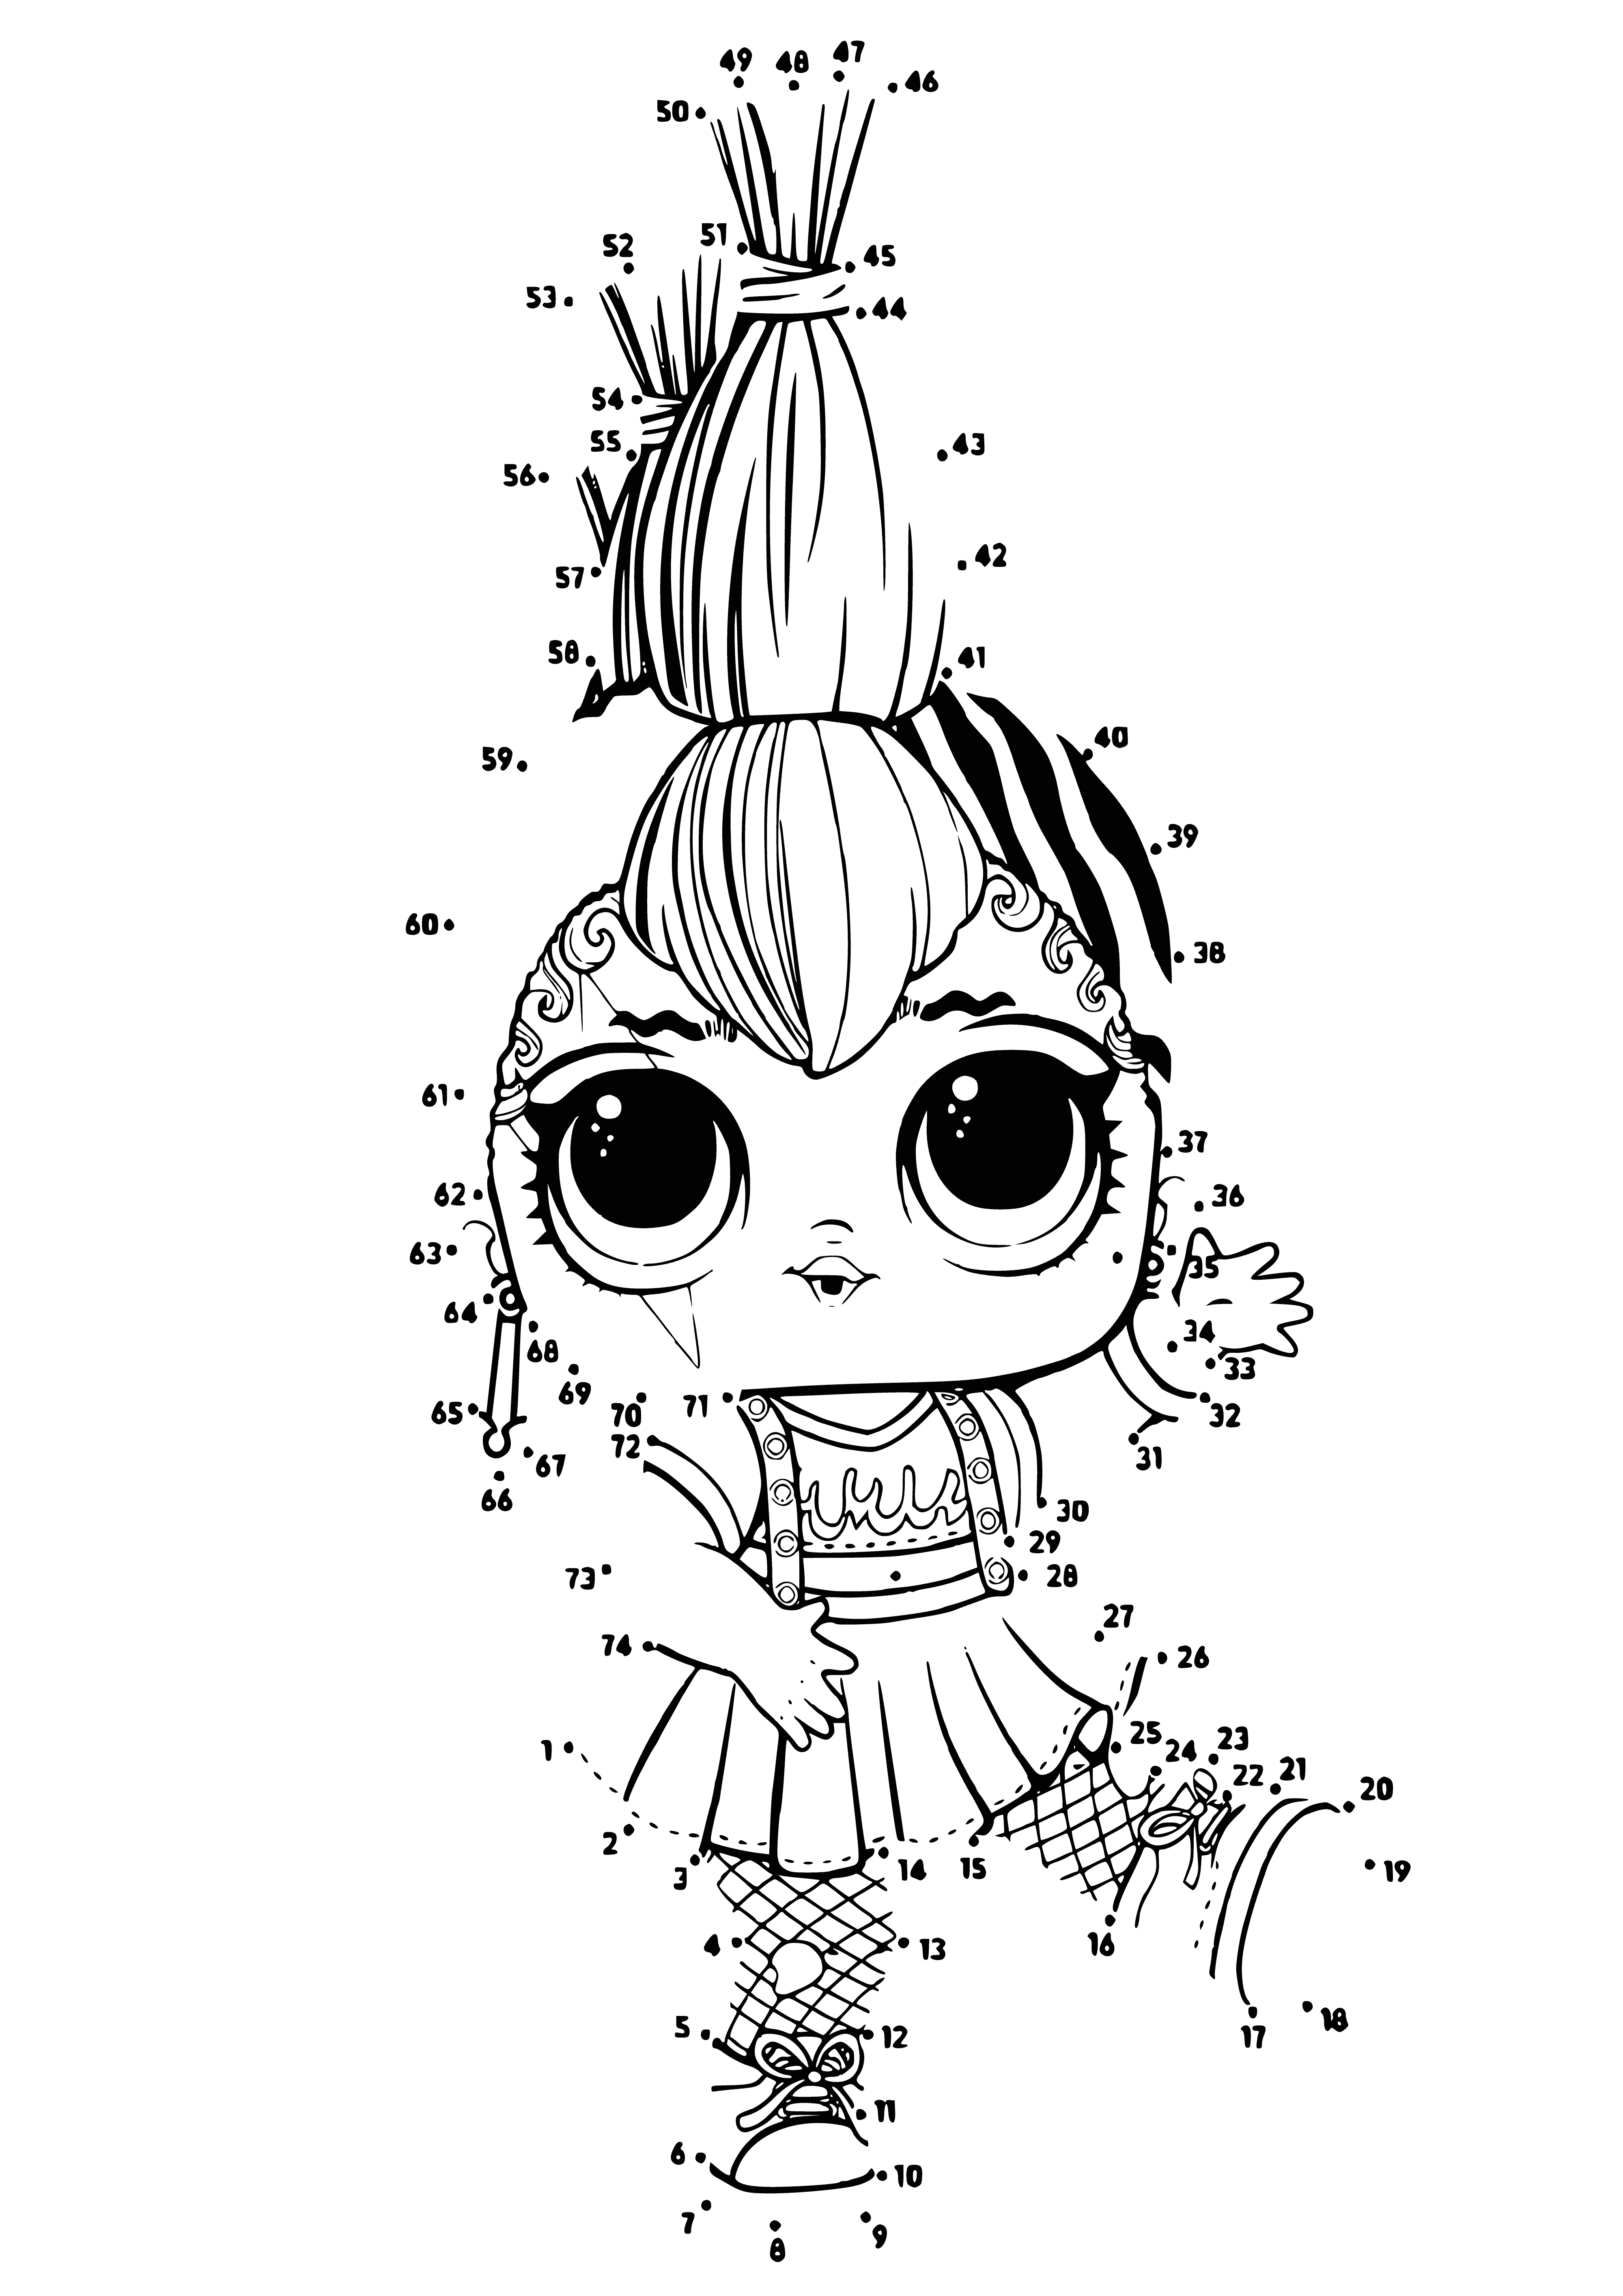 coloring page: Girl in a light shirt & ponytail smiles at the camera with her dog, making an adorable moment to be coloured. #coloringpages